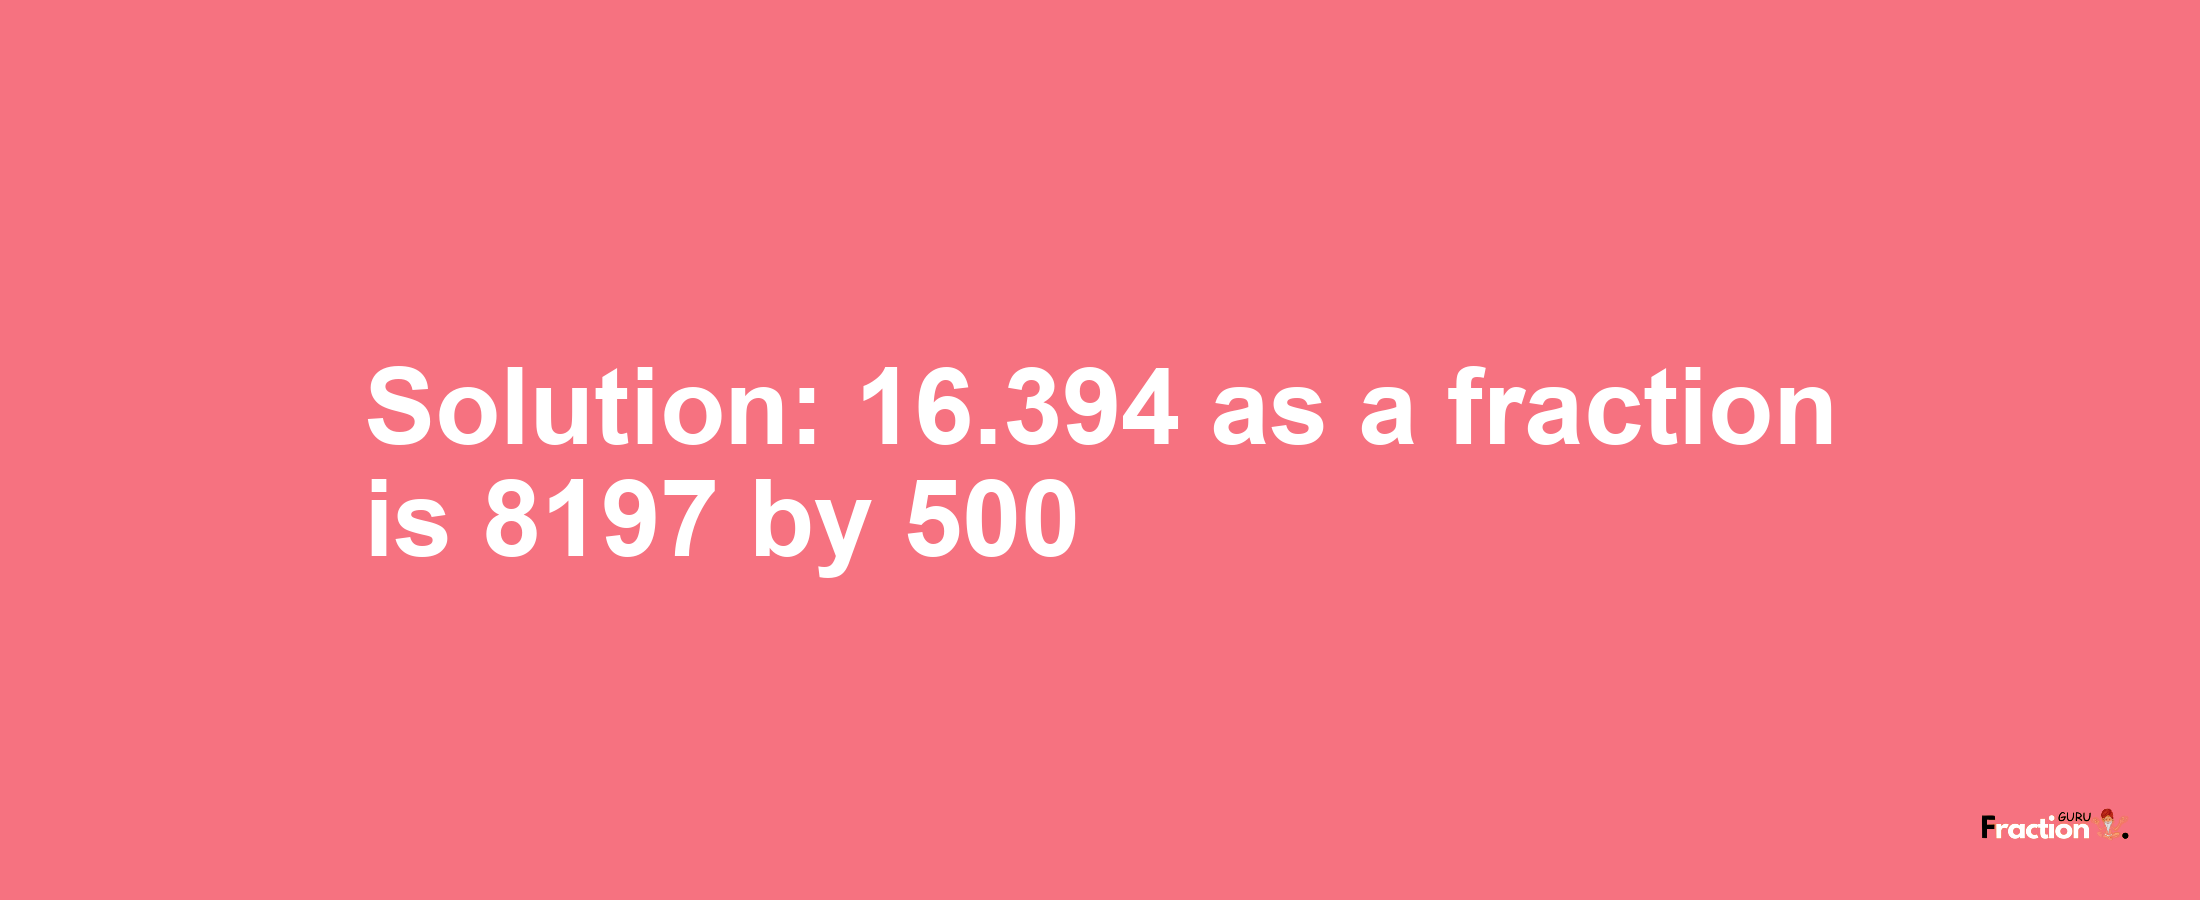 Solution:16.394 as a fraction is 8197/500